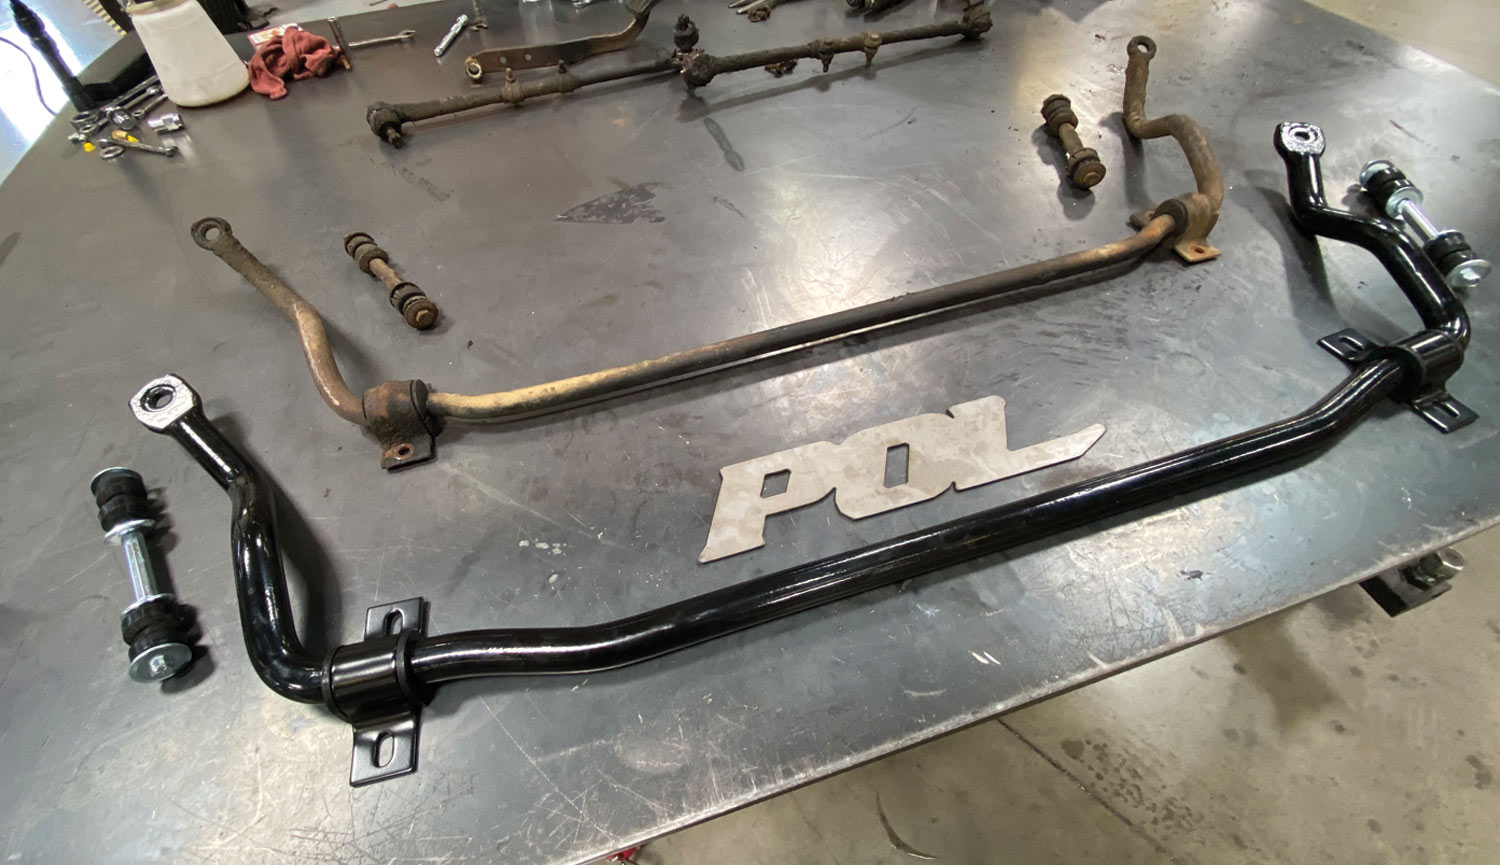 the old and new sway bars sit side by side on a table top